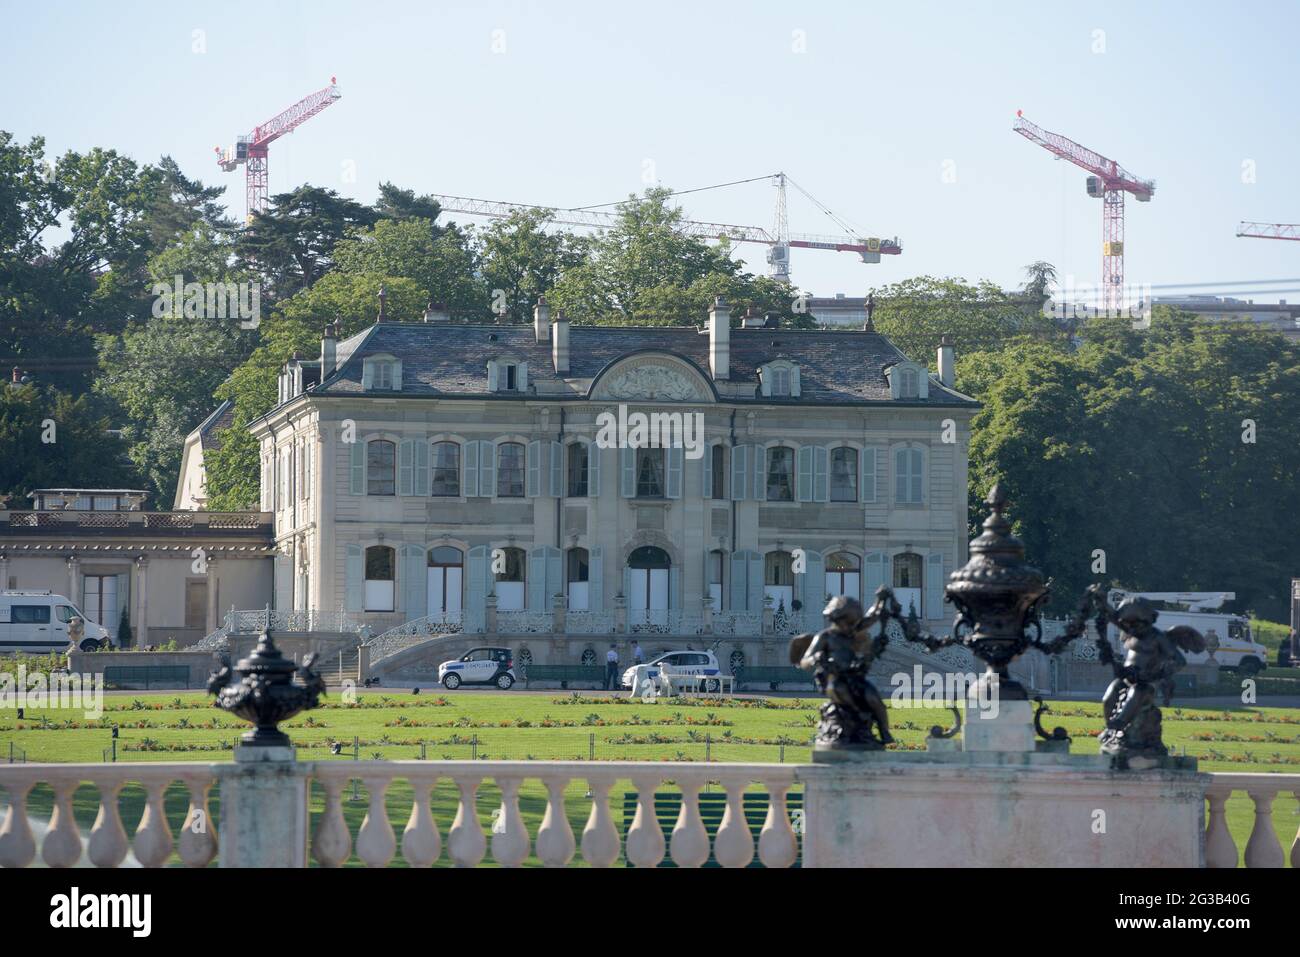 Geneva. 15th June, 2021. Photo taken on June 15, 2021 shows an exterior view of the Villa La Grange, the venue for the upcoming Biden-Putin summit, in Geneva, Switzerland. U.S. President Joe Biden and his Russian counterpart Vladimir Putin are set to meet in the Swiss city of Geneva on Wednesday, which will be the two leaders' first face-to-face meeting since the Biden administration took office on Jan. 20. Credit: Guo Chen/Xinhua/Alamy Live News Stock Photo